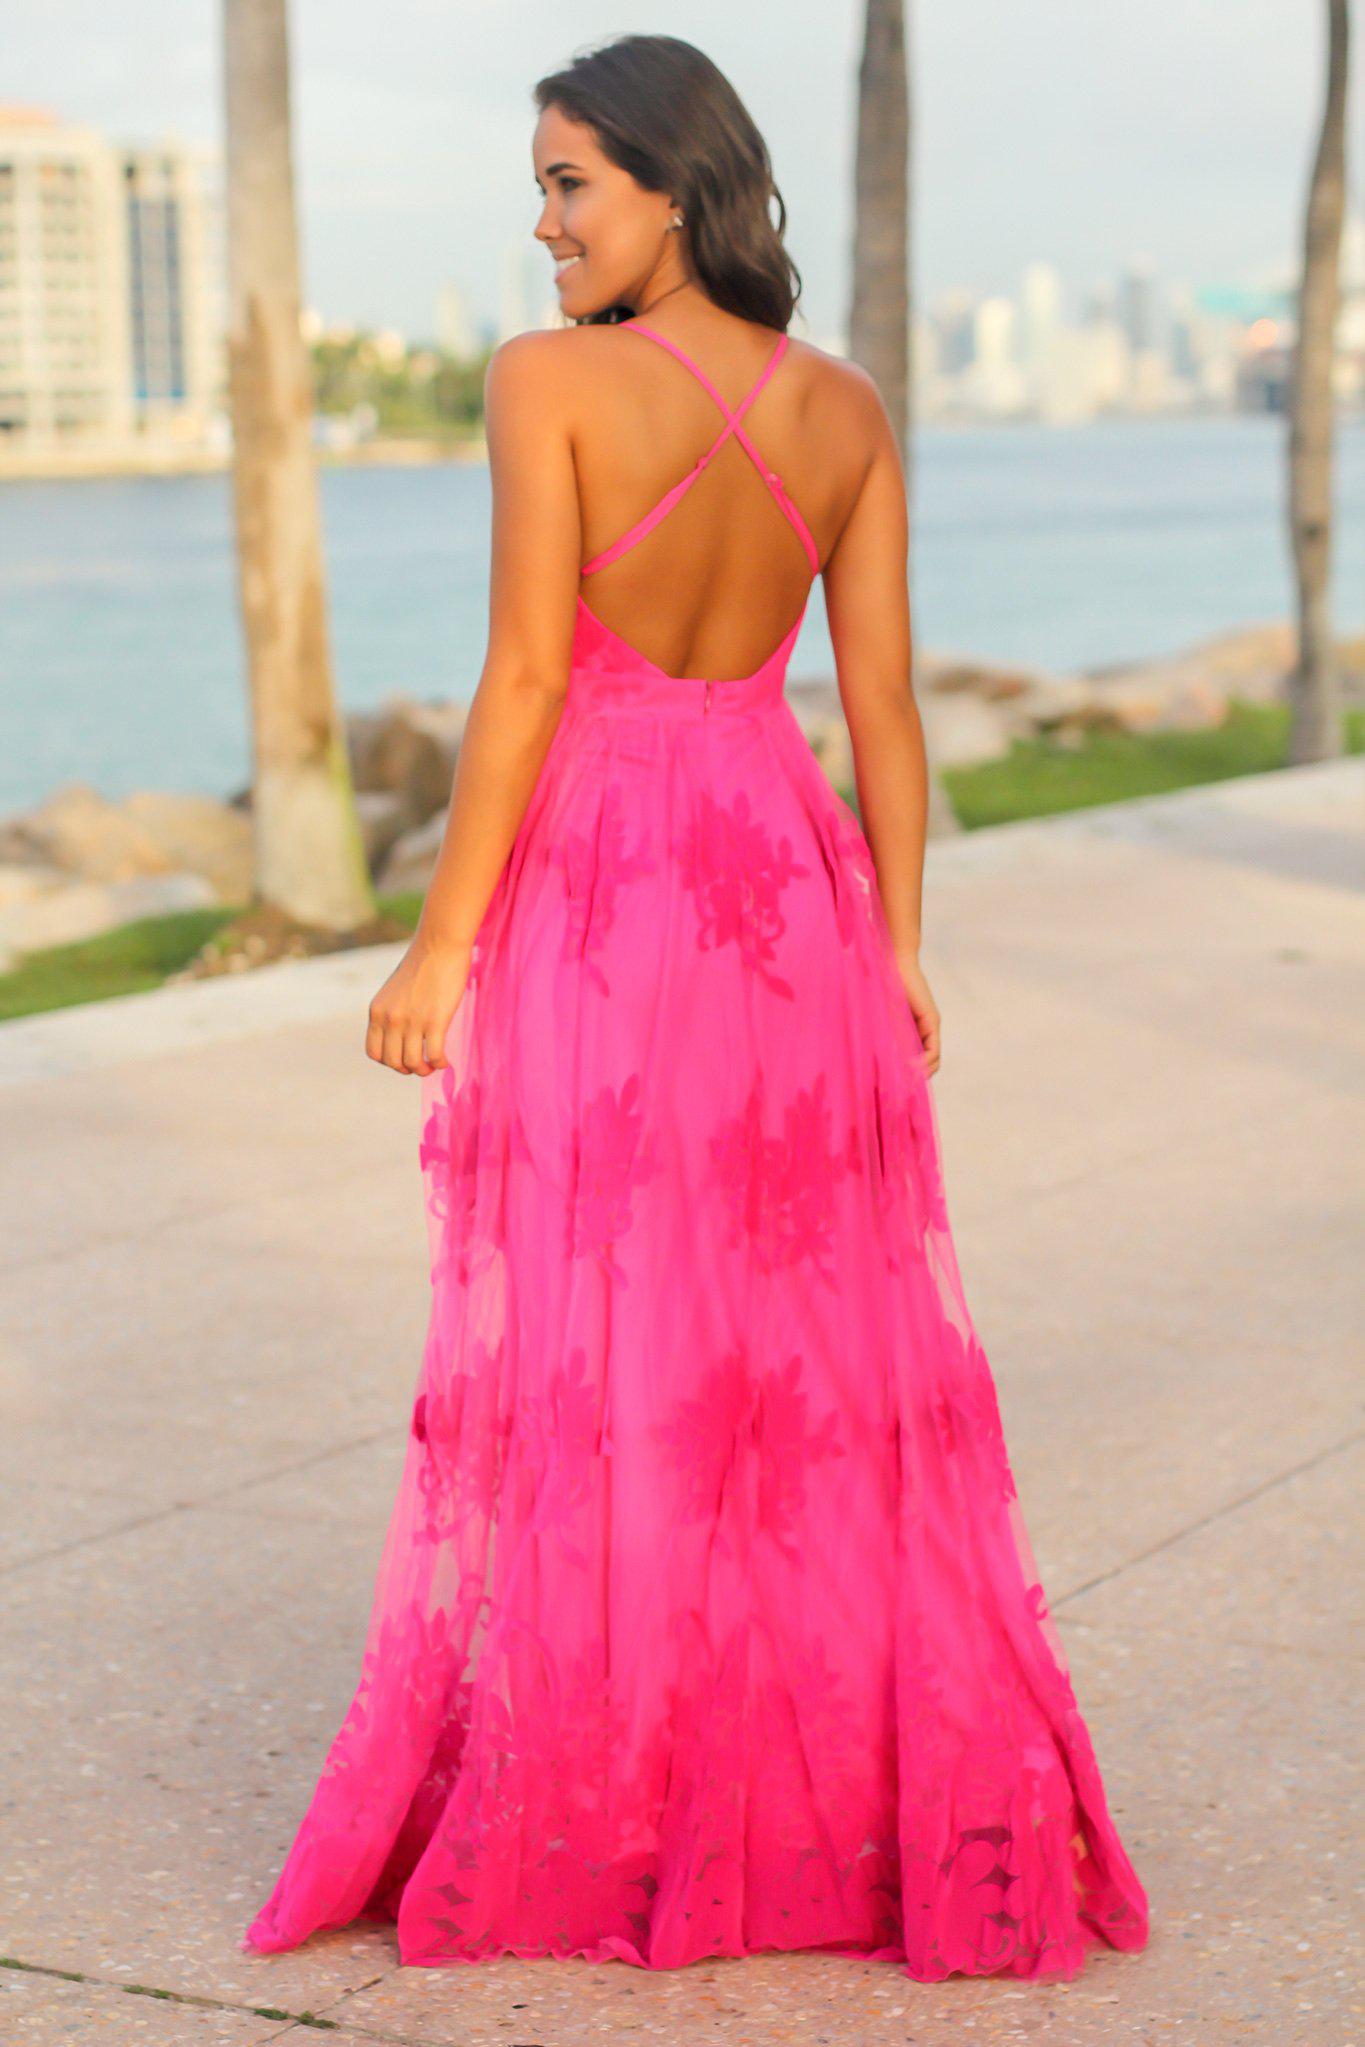 Pink Floral Tulle Maxi Dress with Criss Cross Back